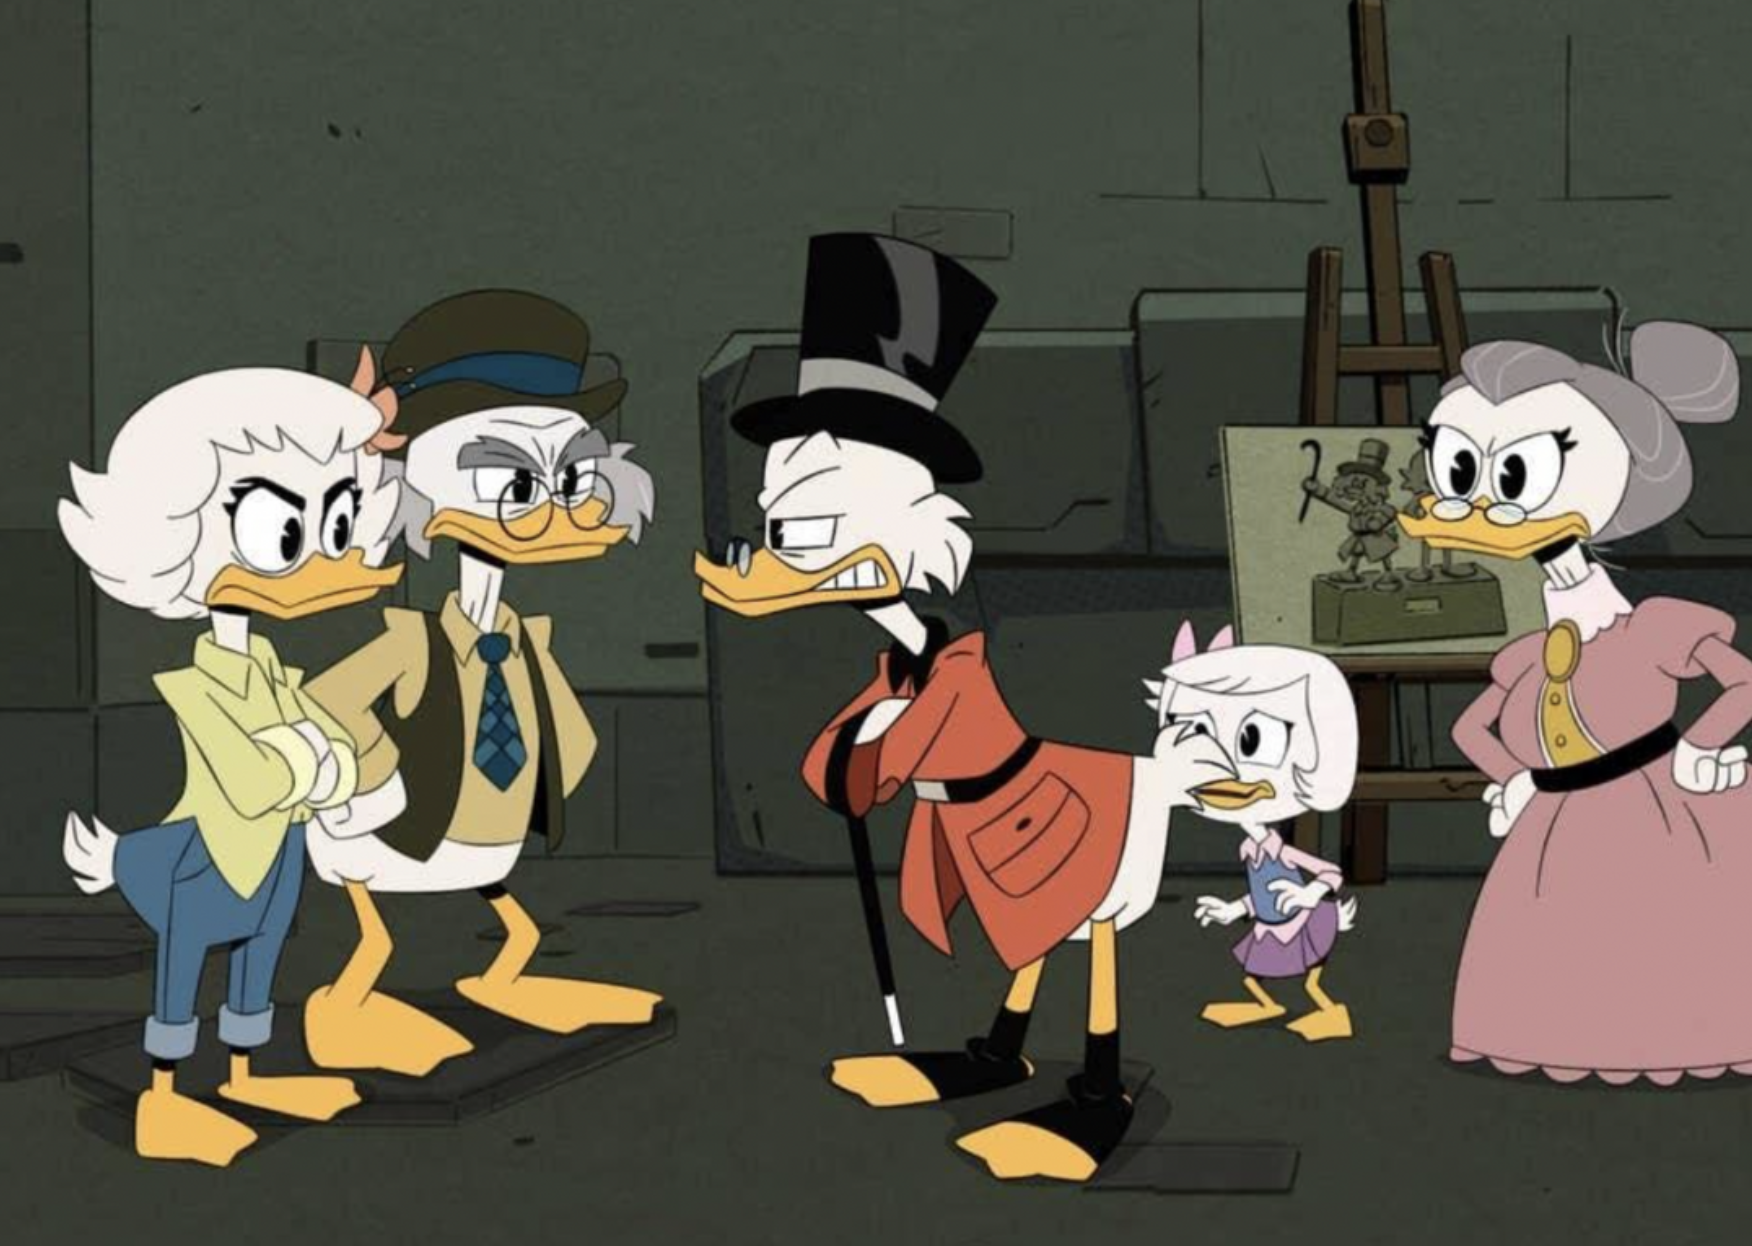 Michelle Gomez, Ashley Jensen, Graham McTavish, David Tennant, and Kate Micucci's animated characters in DuckTales